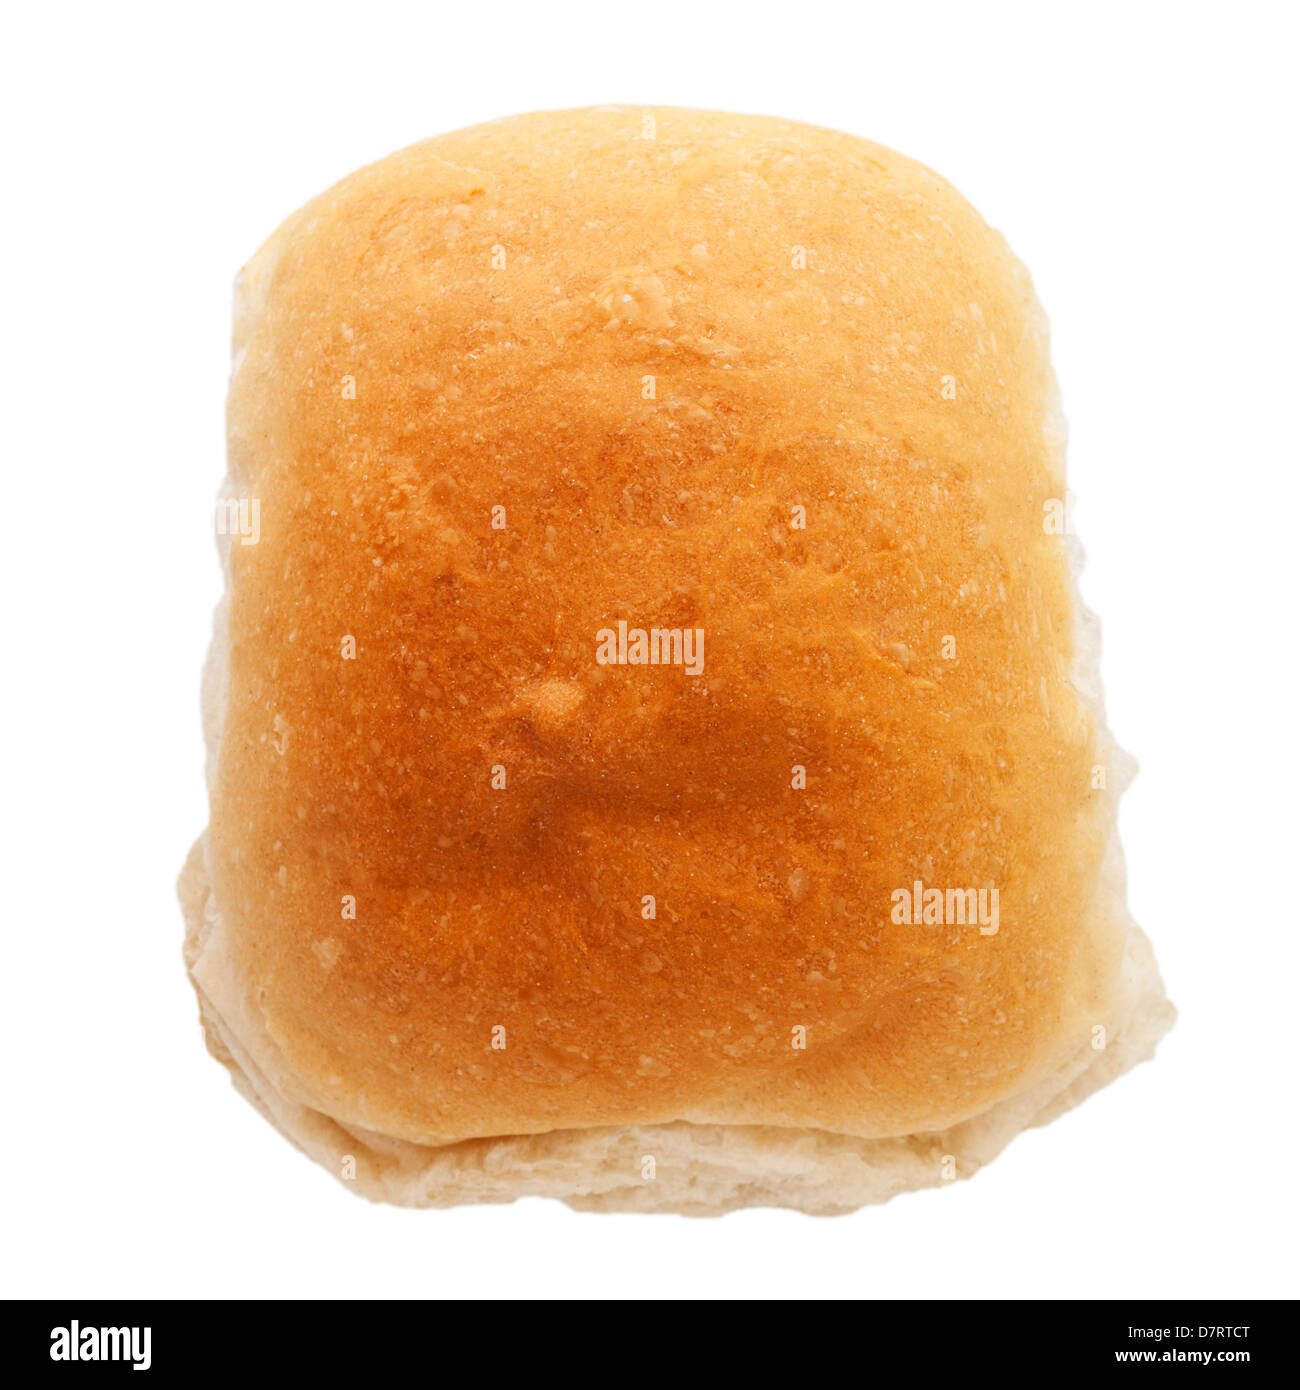 A white bread roll on a white background Stock Photo